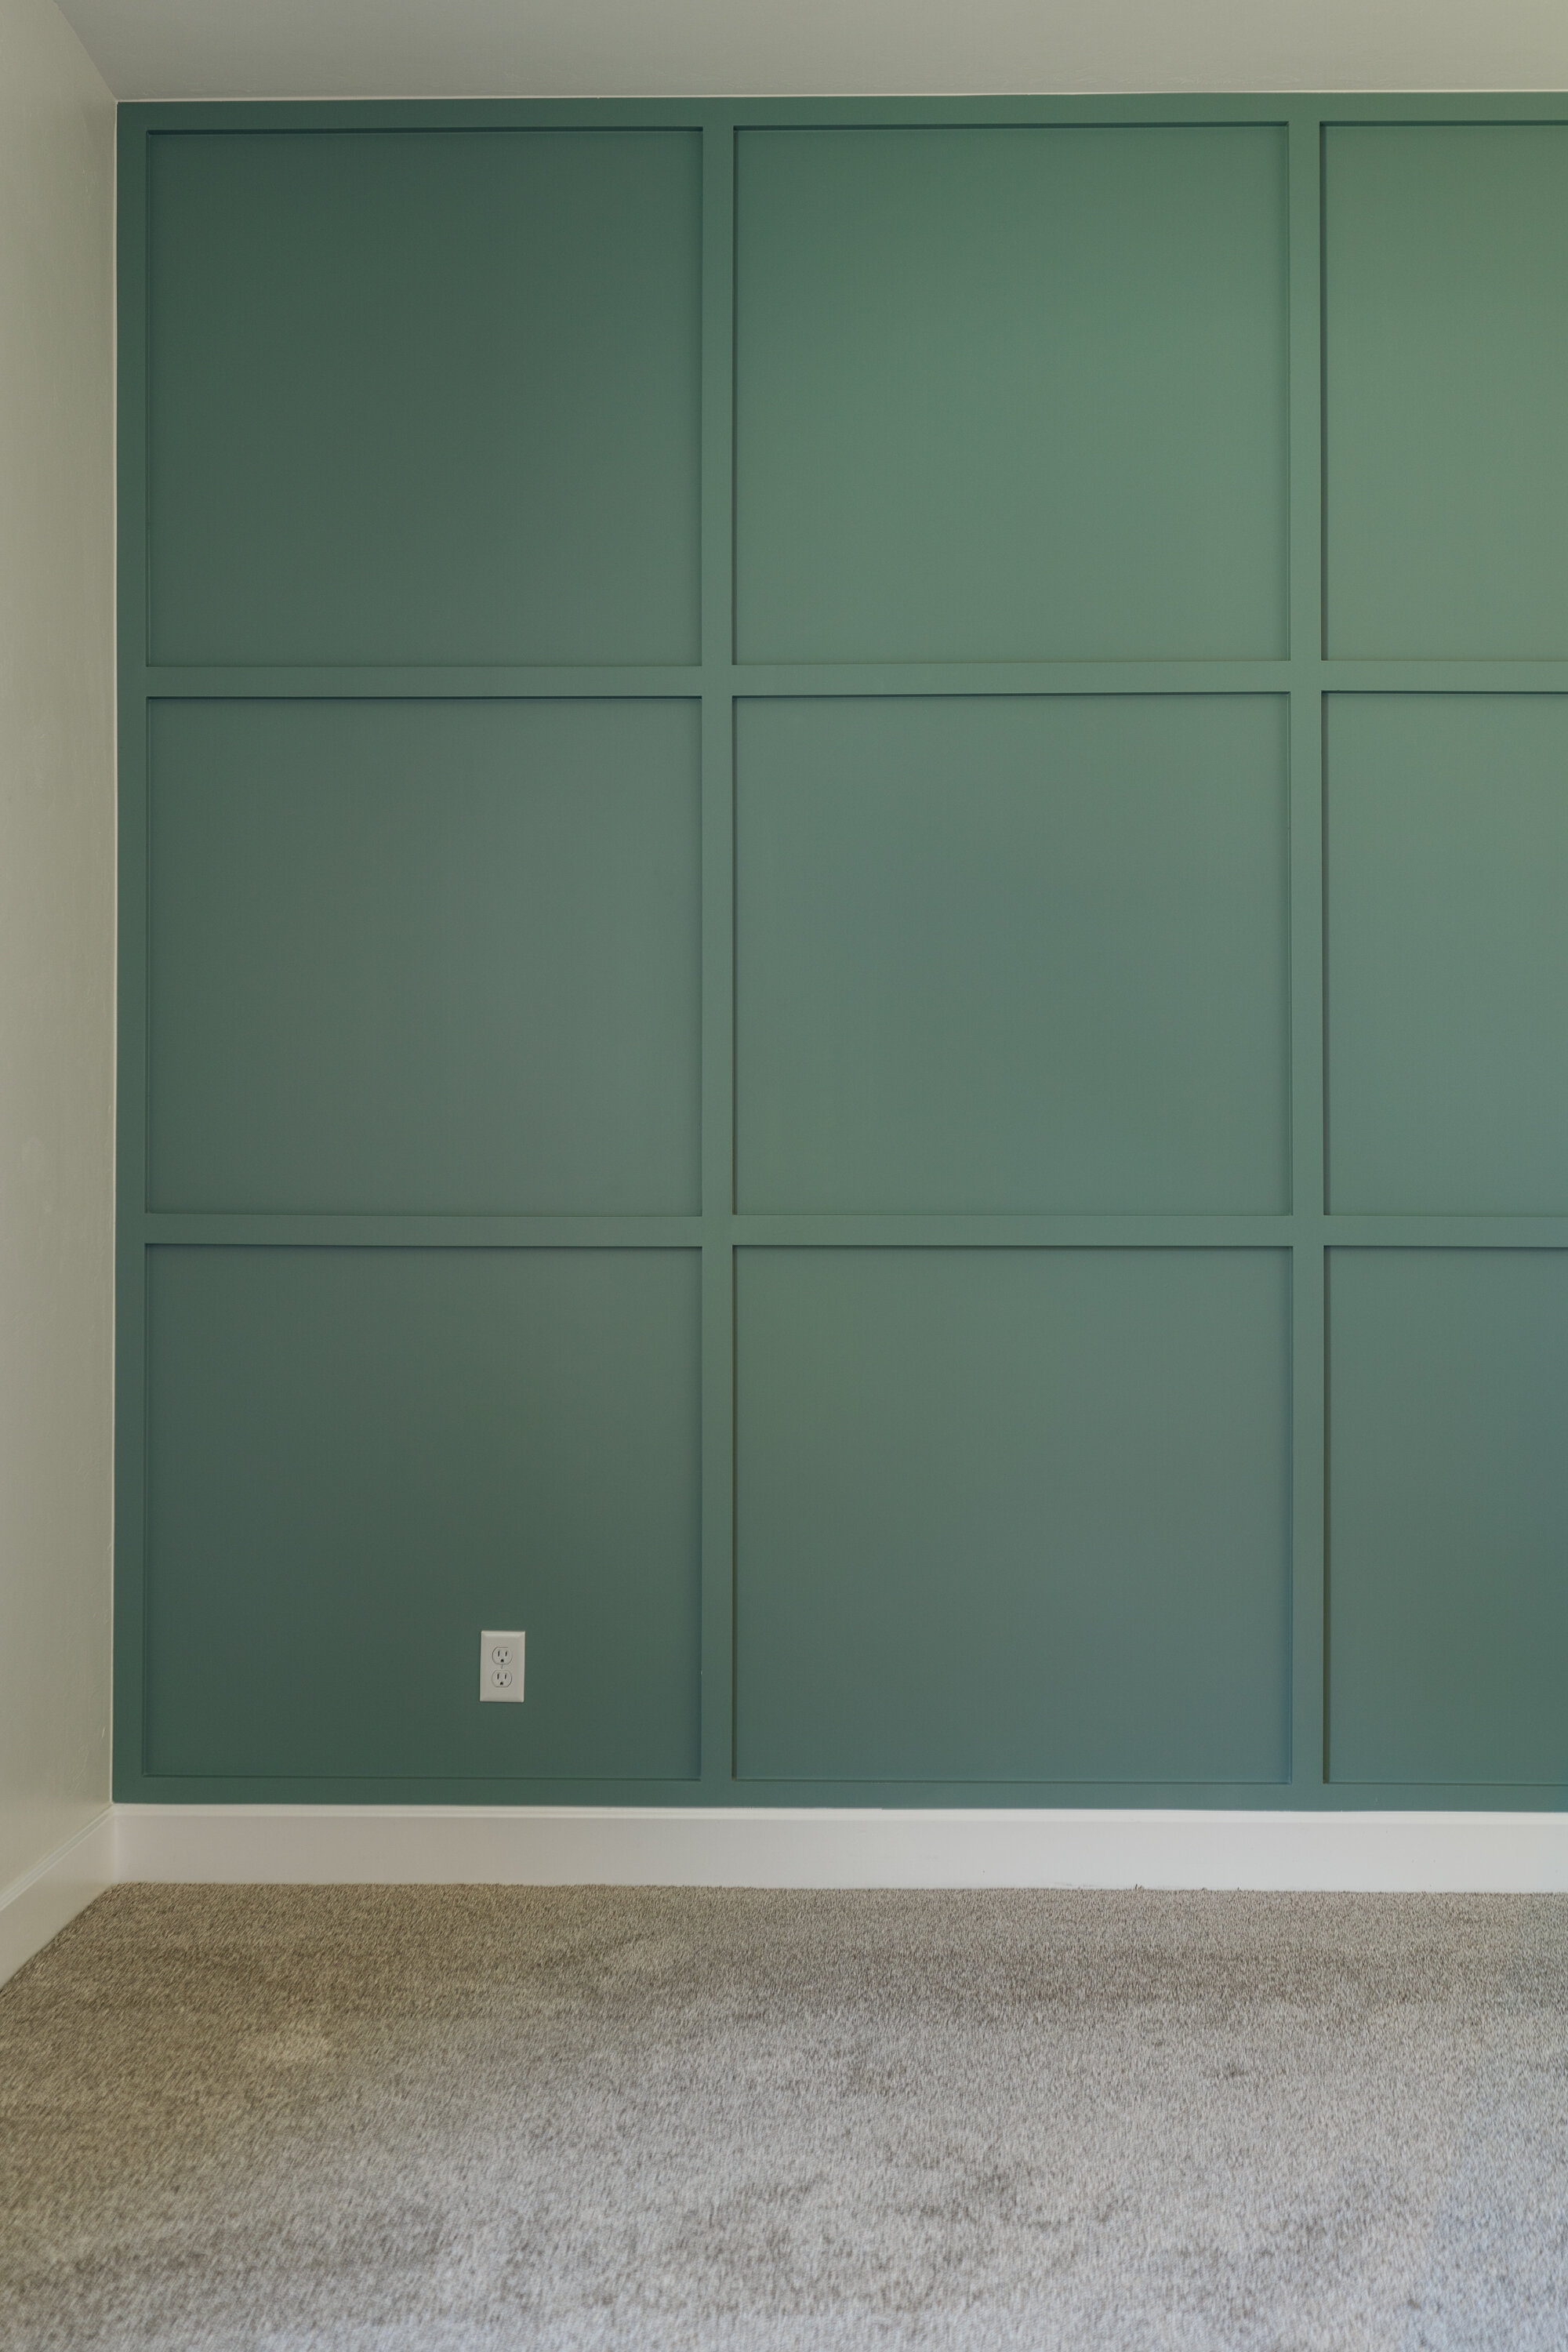 Green wall panelling 